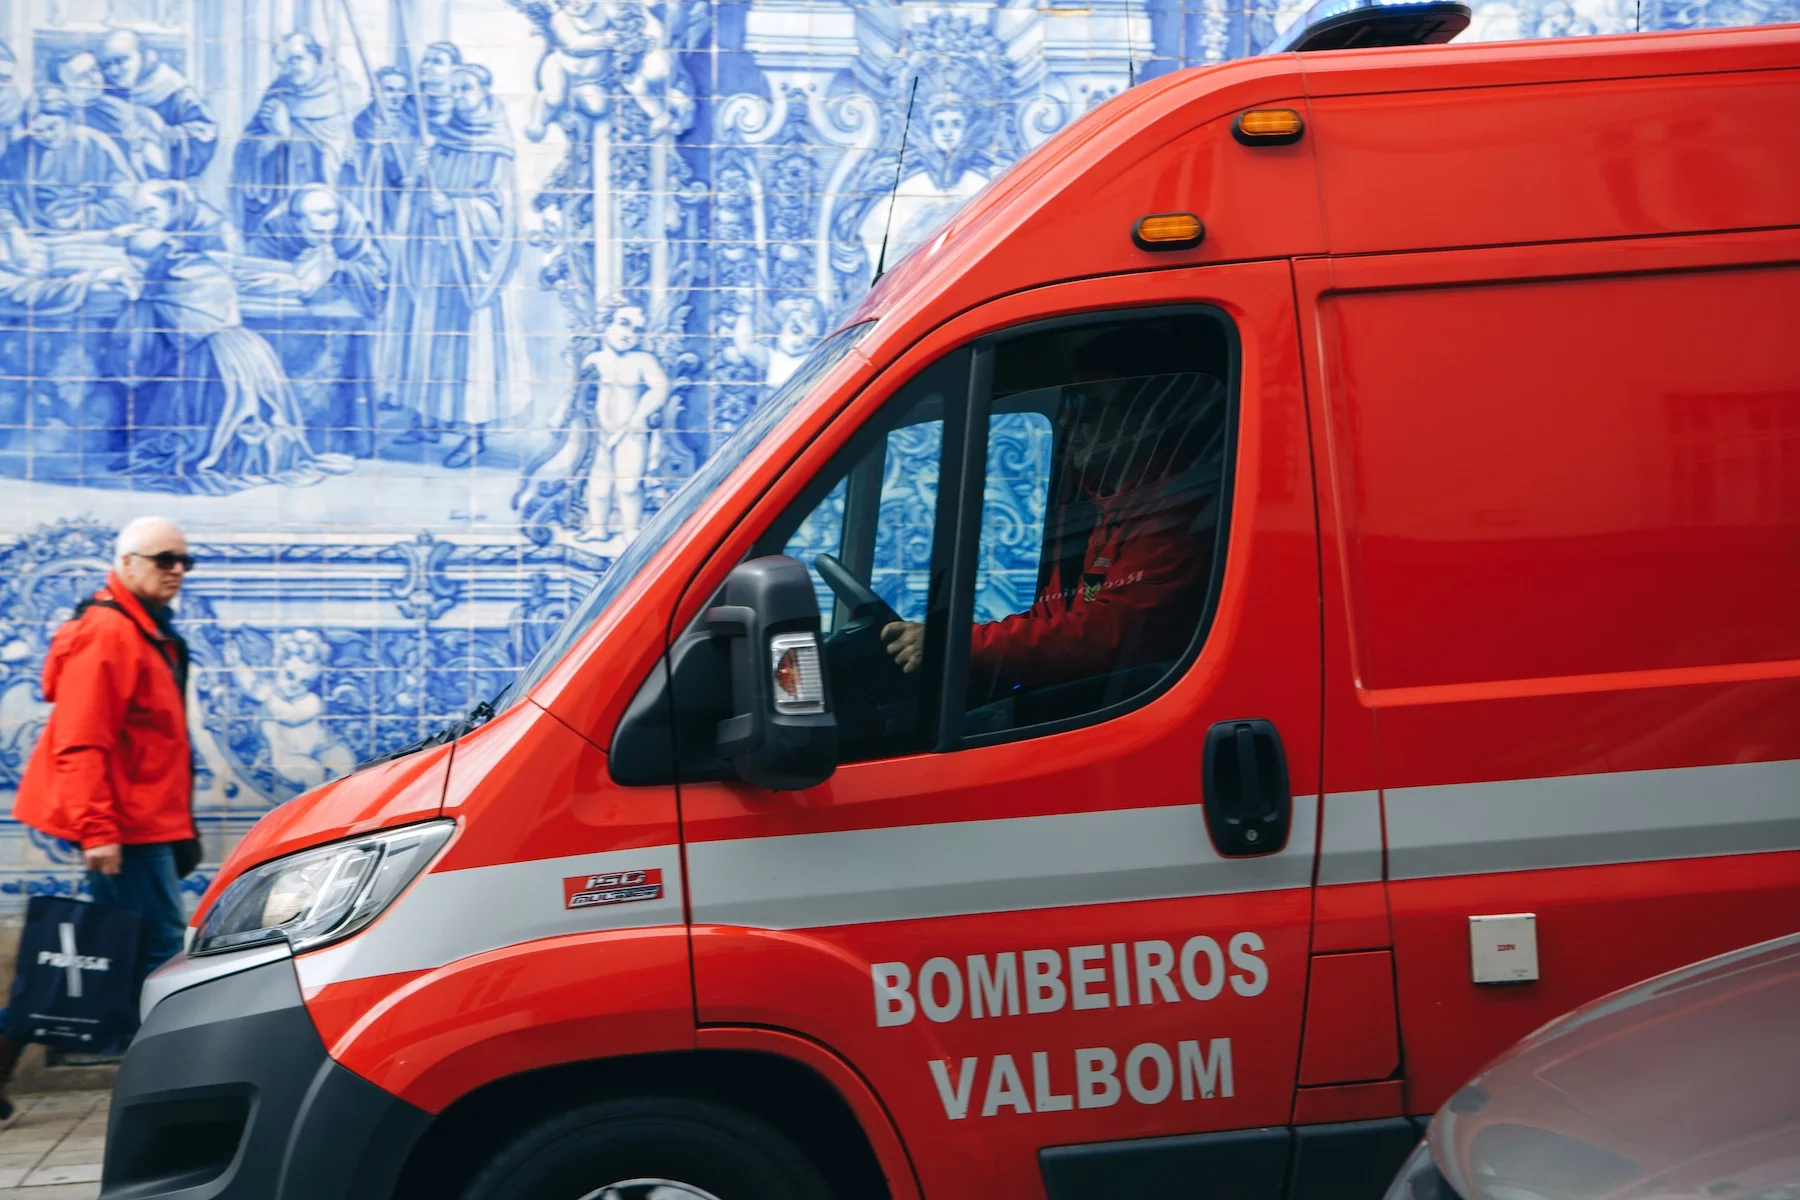 A bright red ambulance is parked on a street in Lisbon right in front of a wall decorated with azulejo tiles